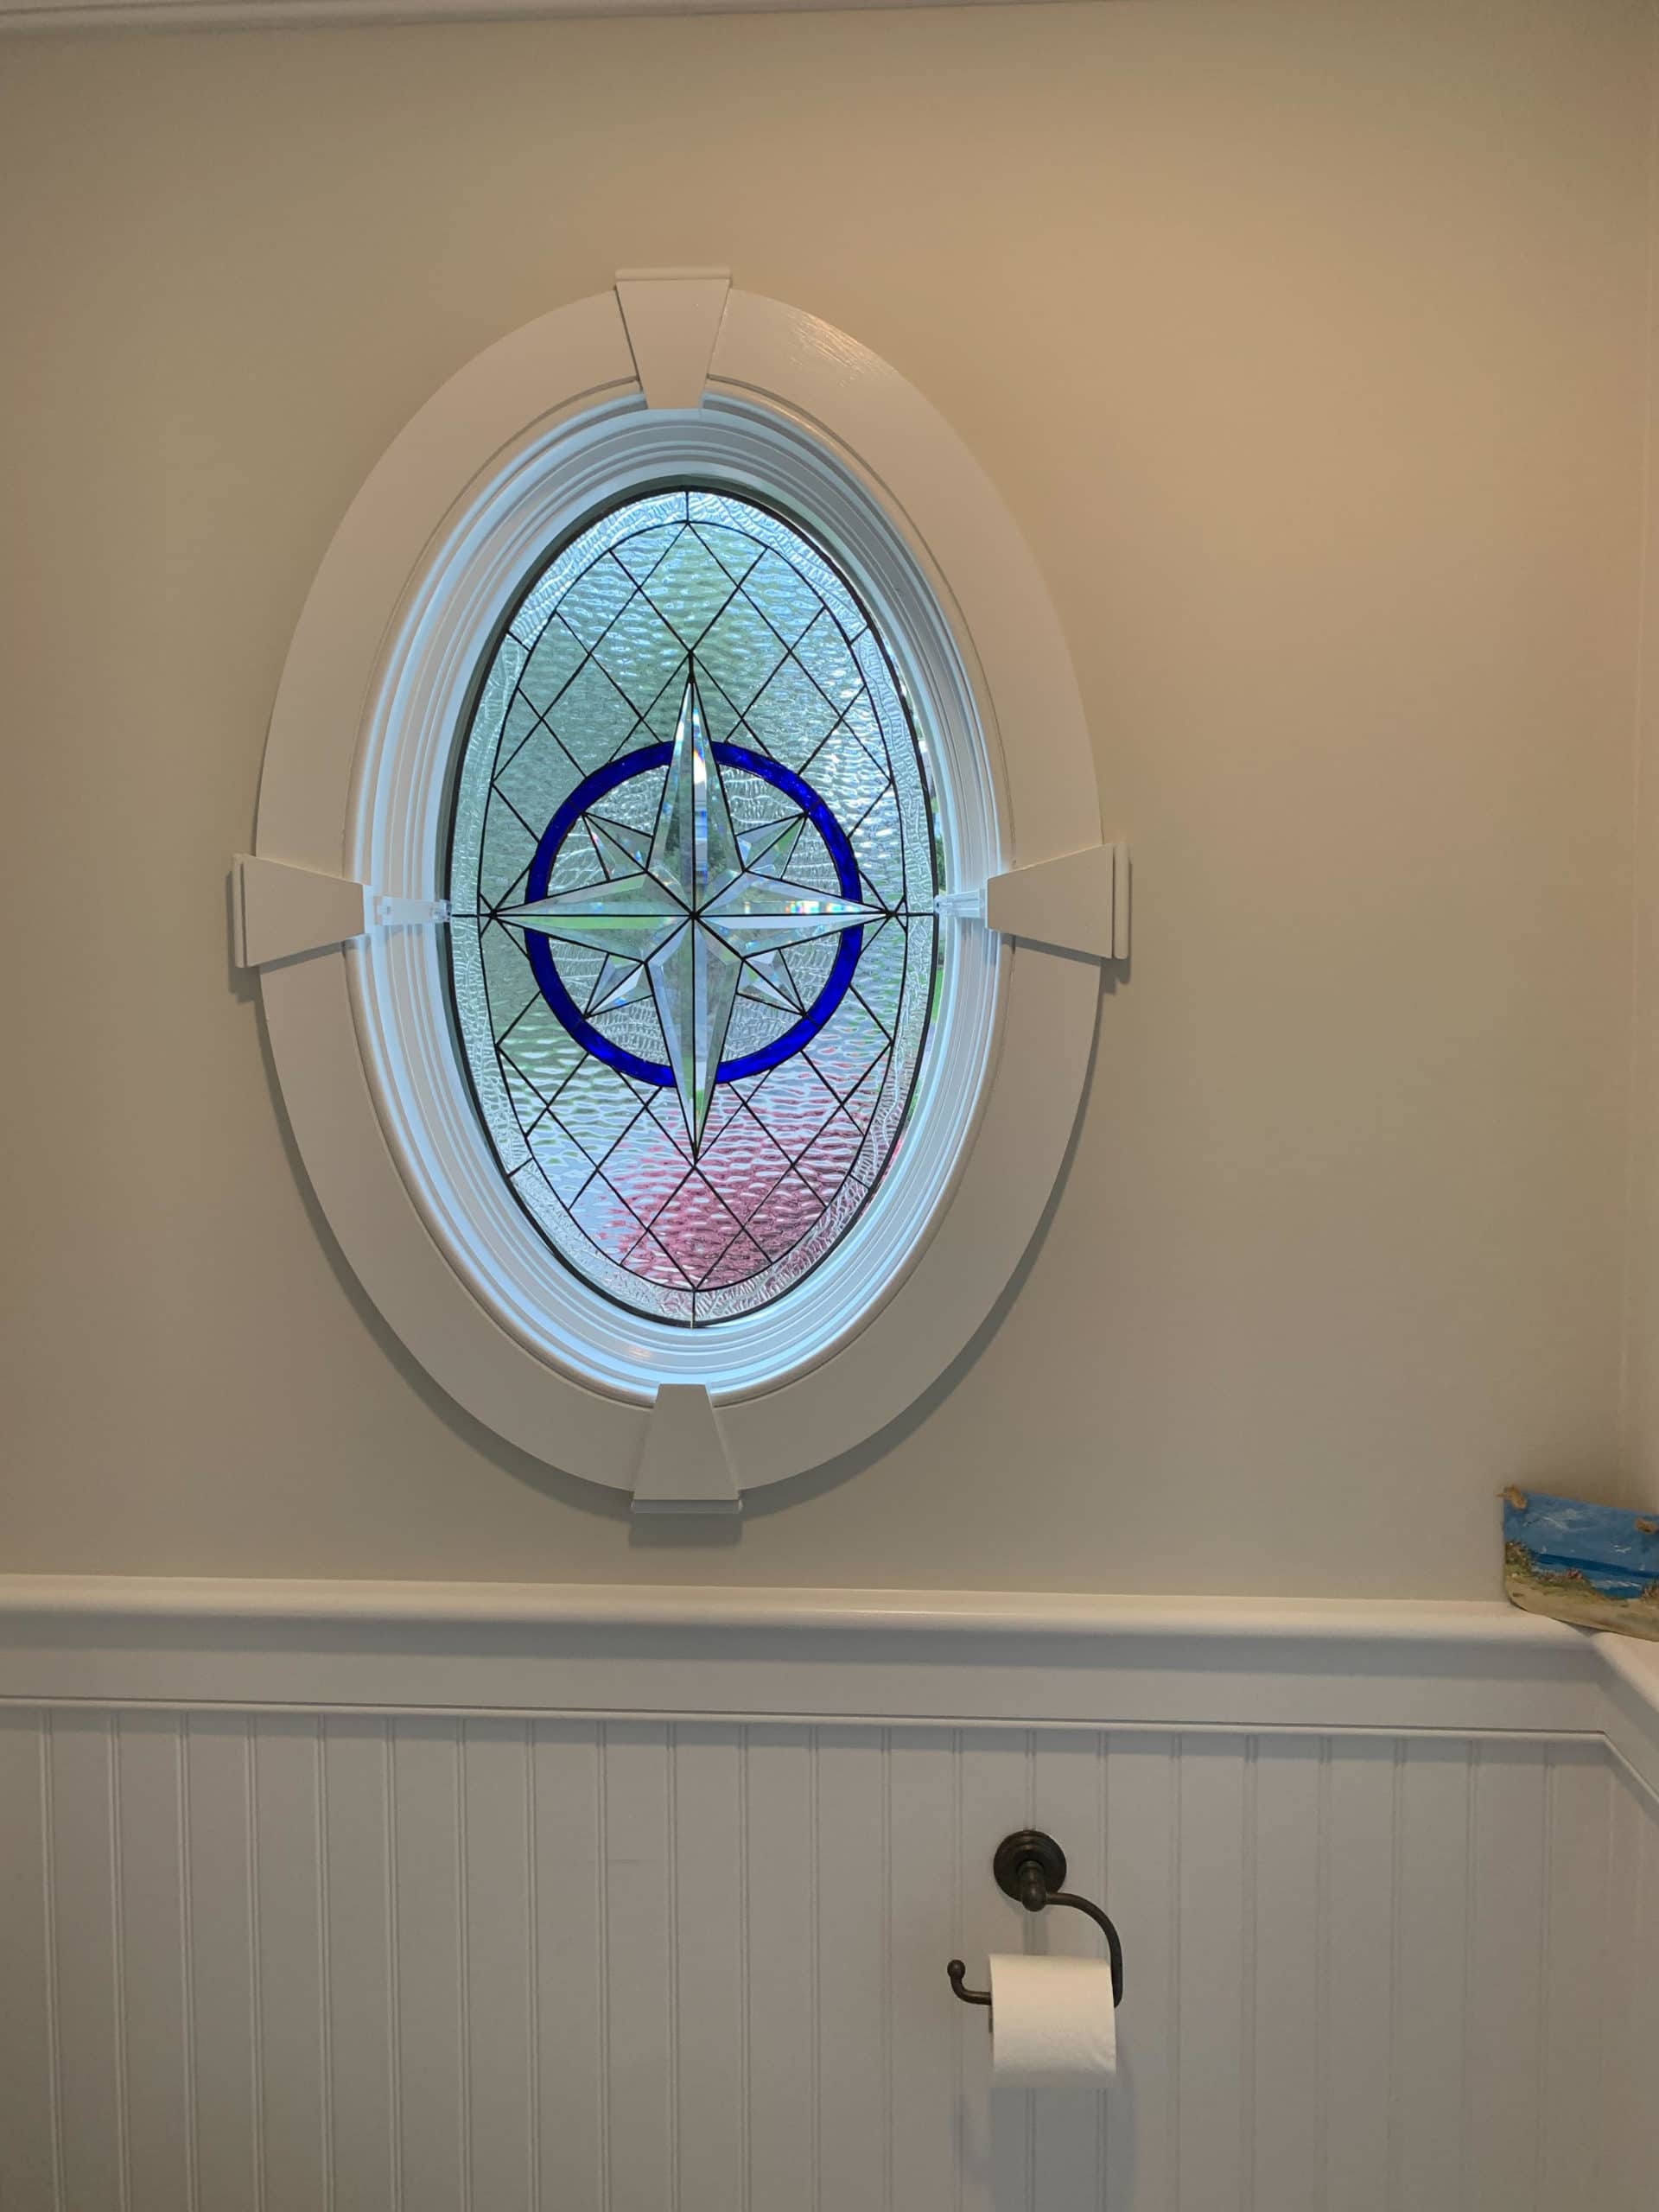 The “Maywood” Leaded Stained Glass Installed in a Bathroom